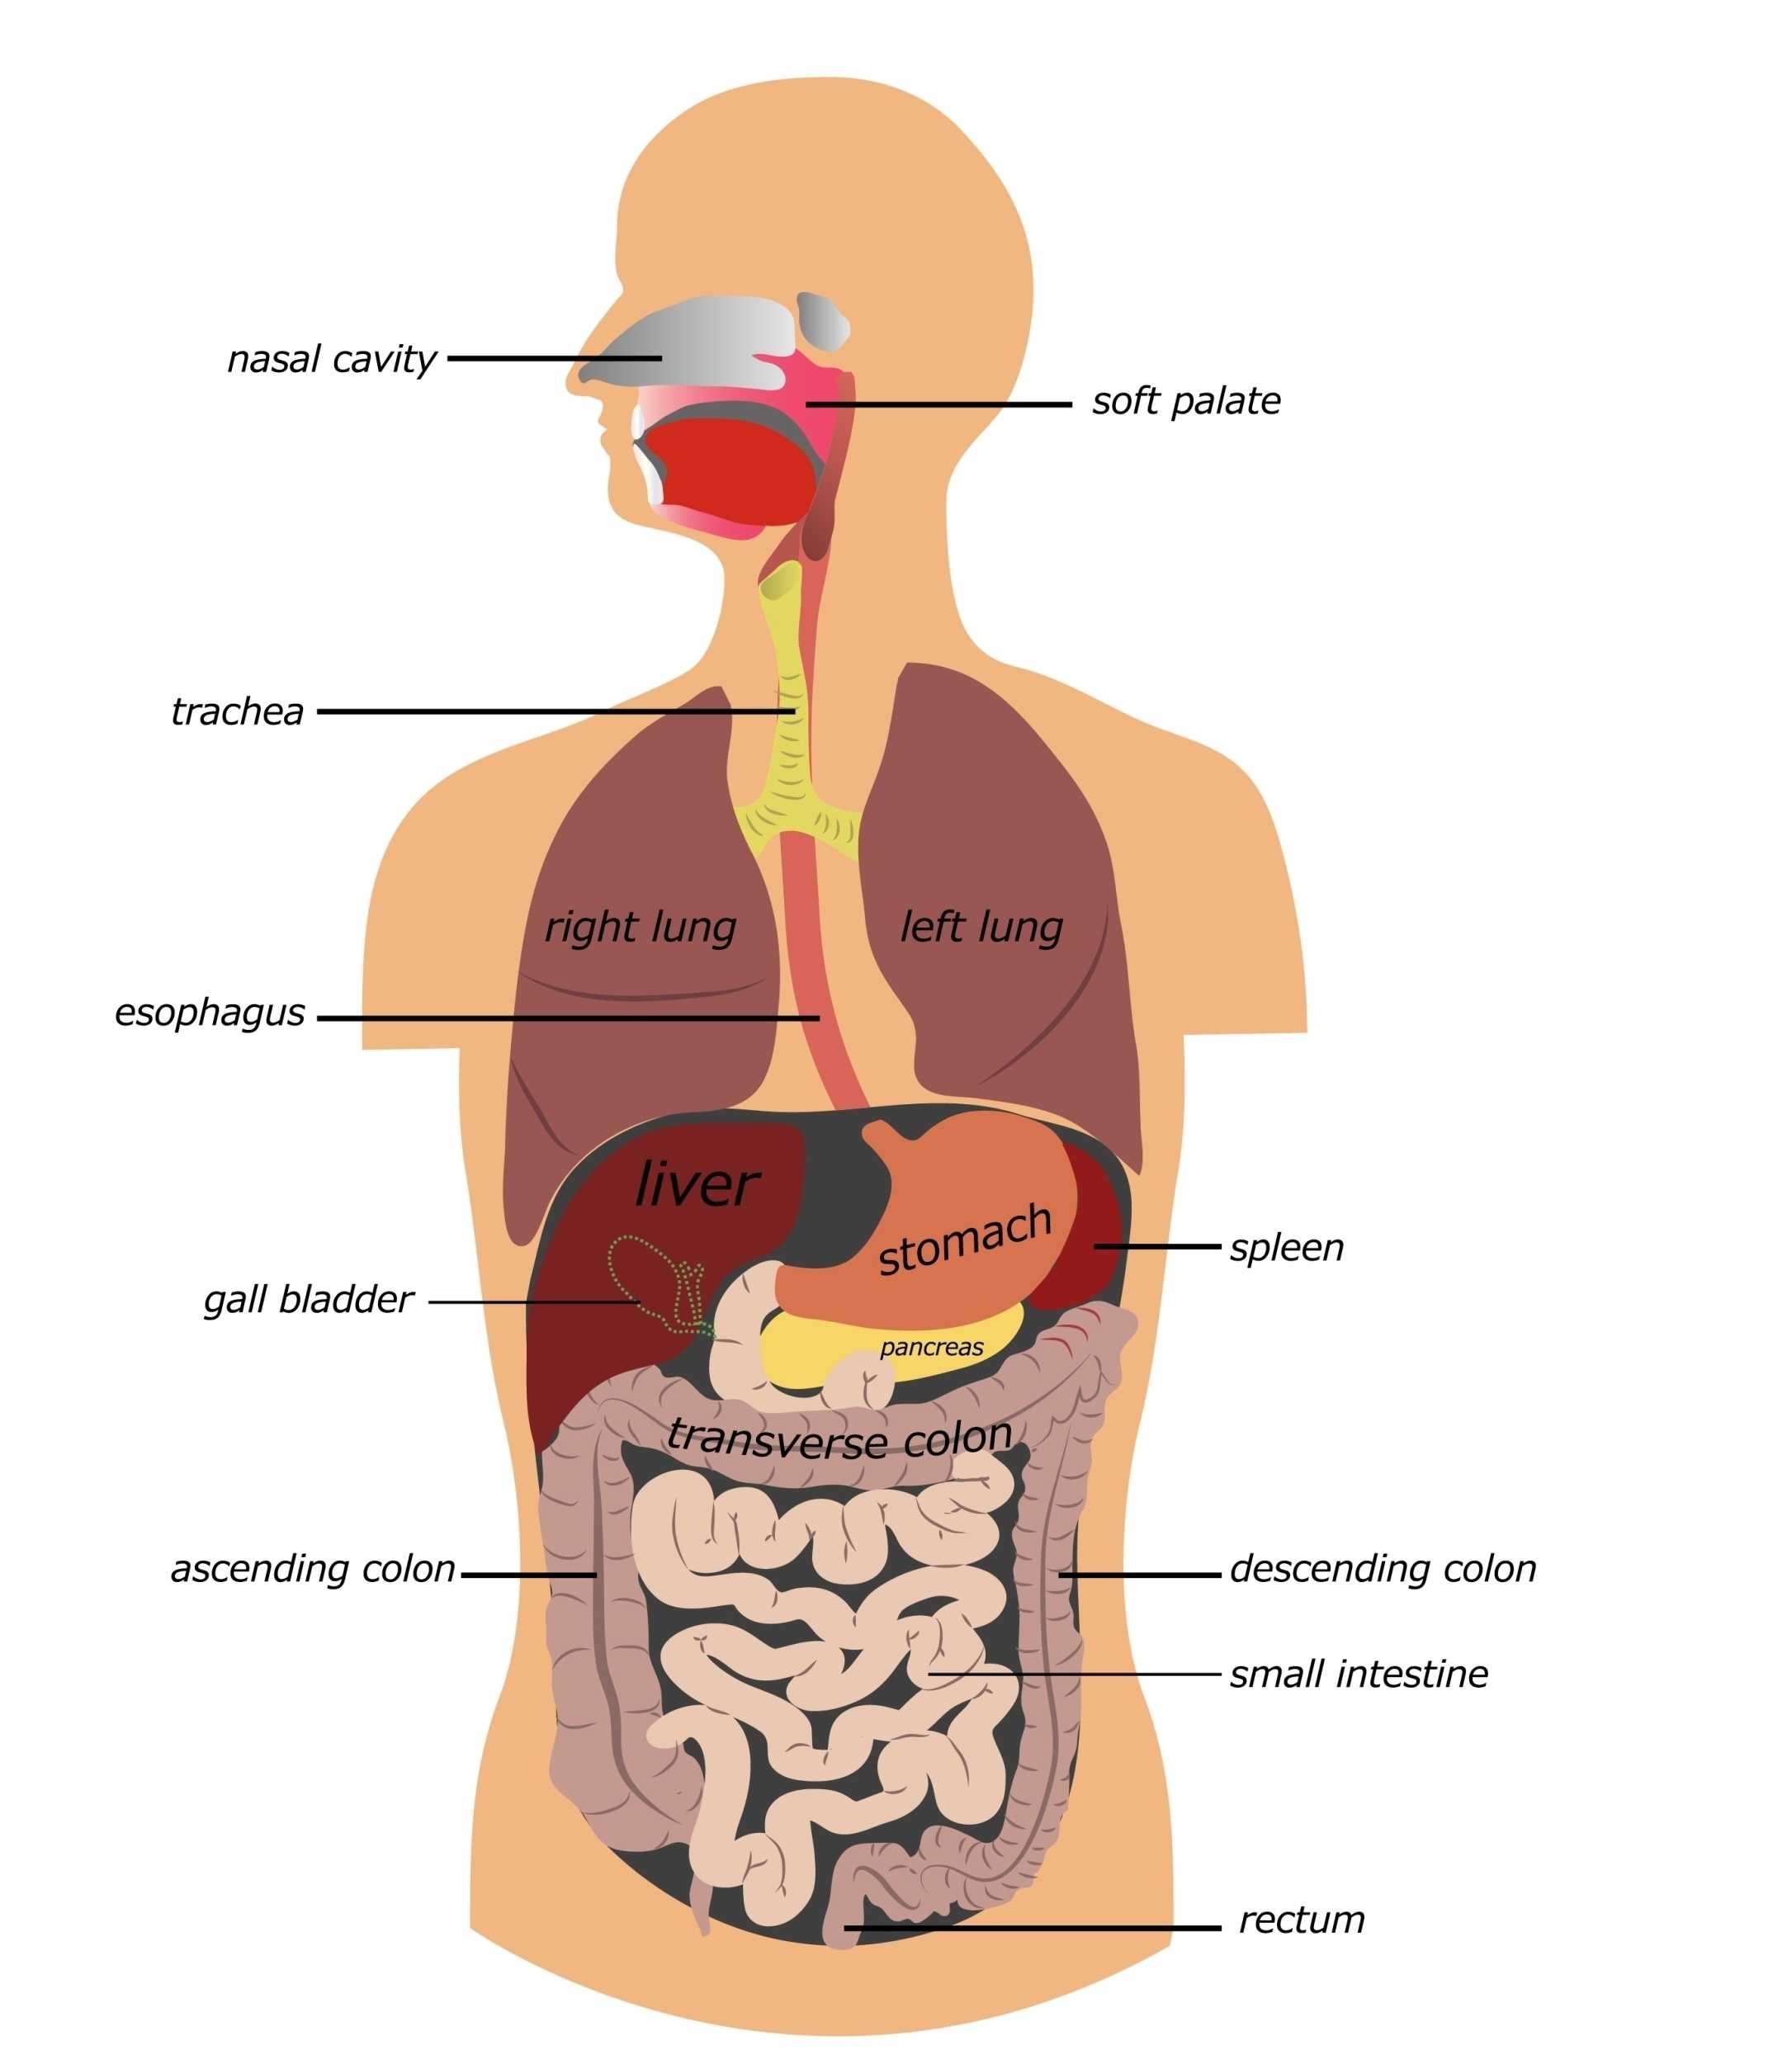 The Human Digestive Tract Worksheet Answers and Schön the Anatomy the Human Digestive System Ideen Anatomie Von